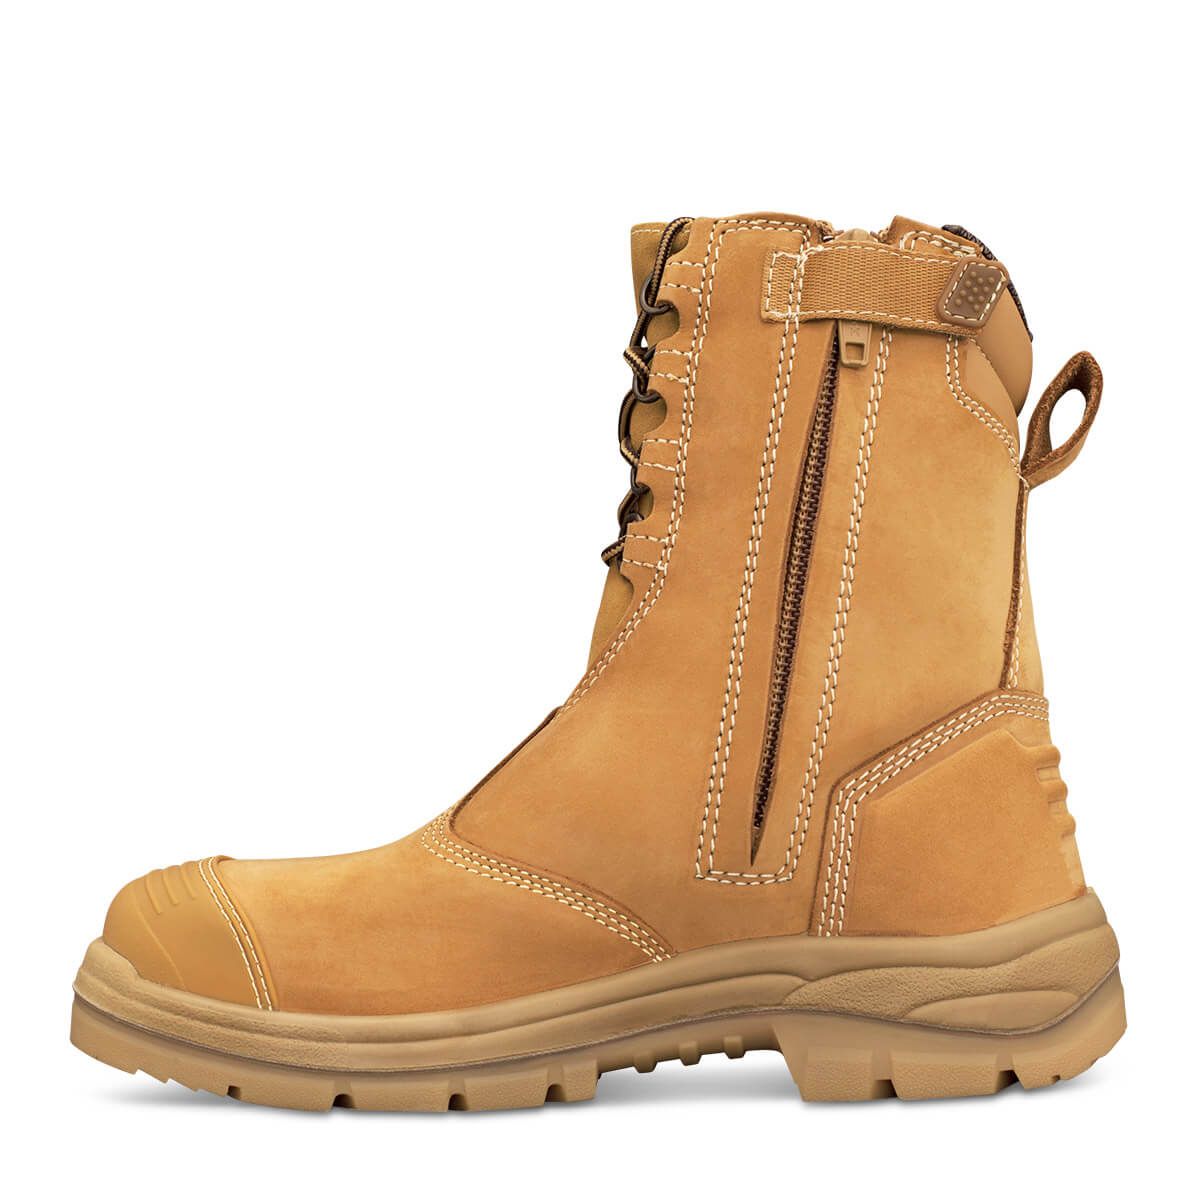 Oliver Mens 55-385 200mm Zip at Boots Steel Bump Nitrile Wheat 5